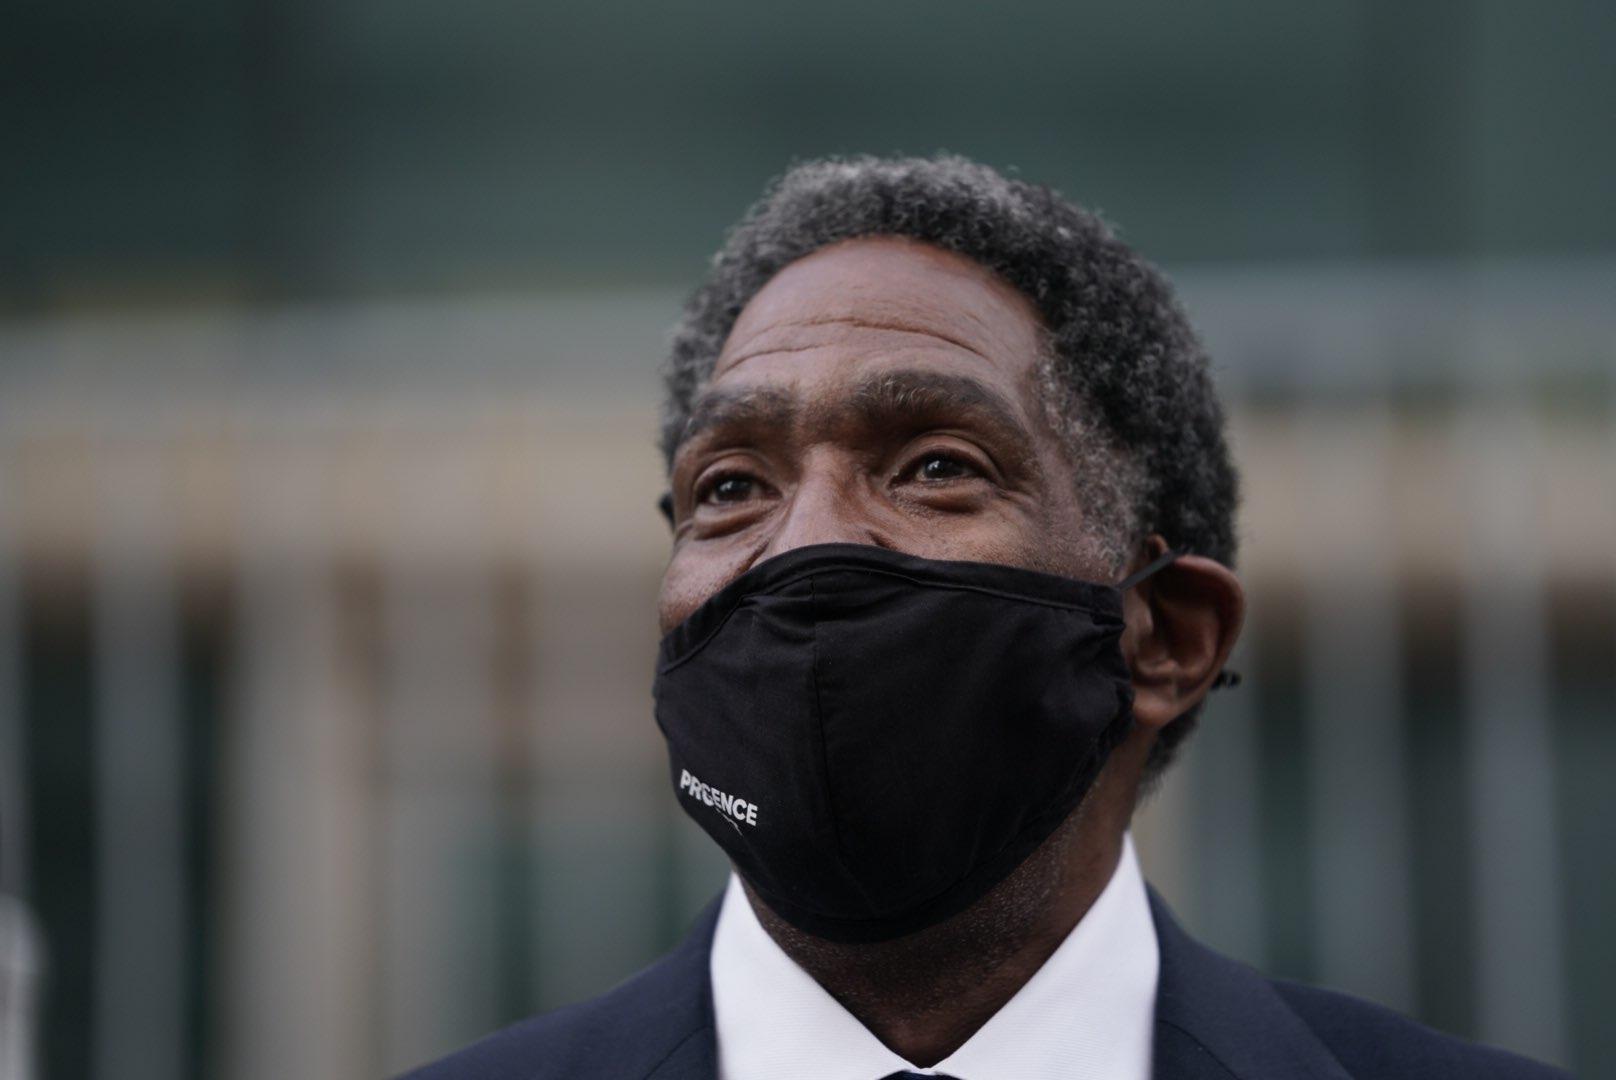 Jaythan Kendrick outside the Queens County Supreme Court after his exoneration on Nov. 19, 2020. (Image: Ben Hider for AP/ Innocence Project)